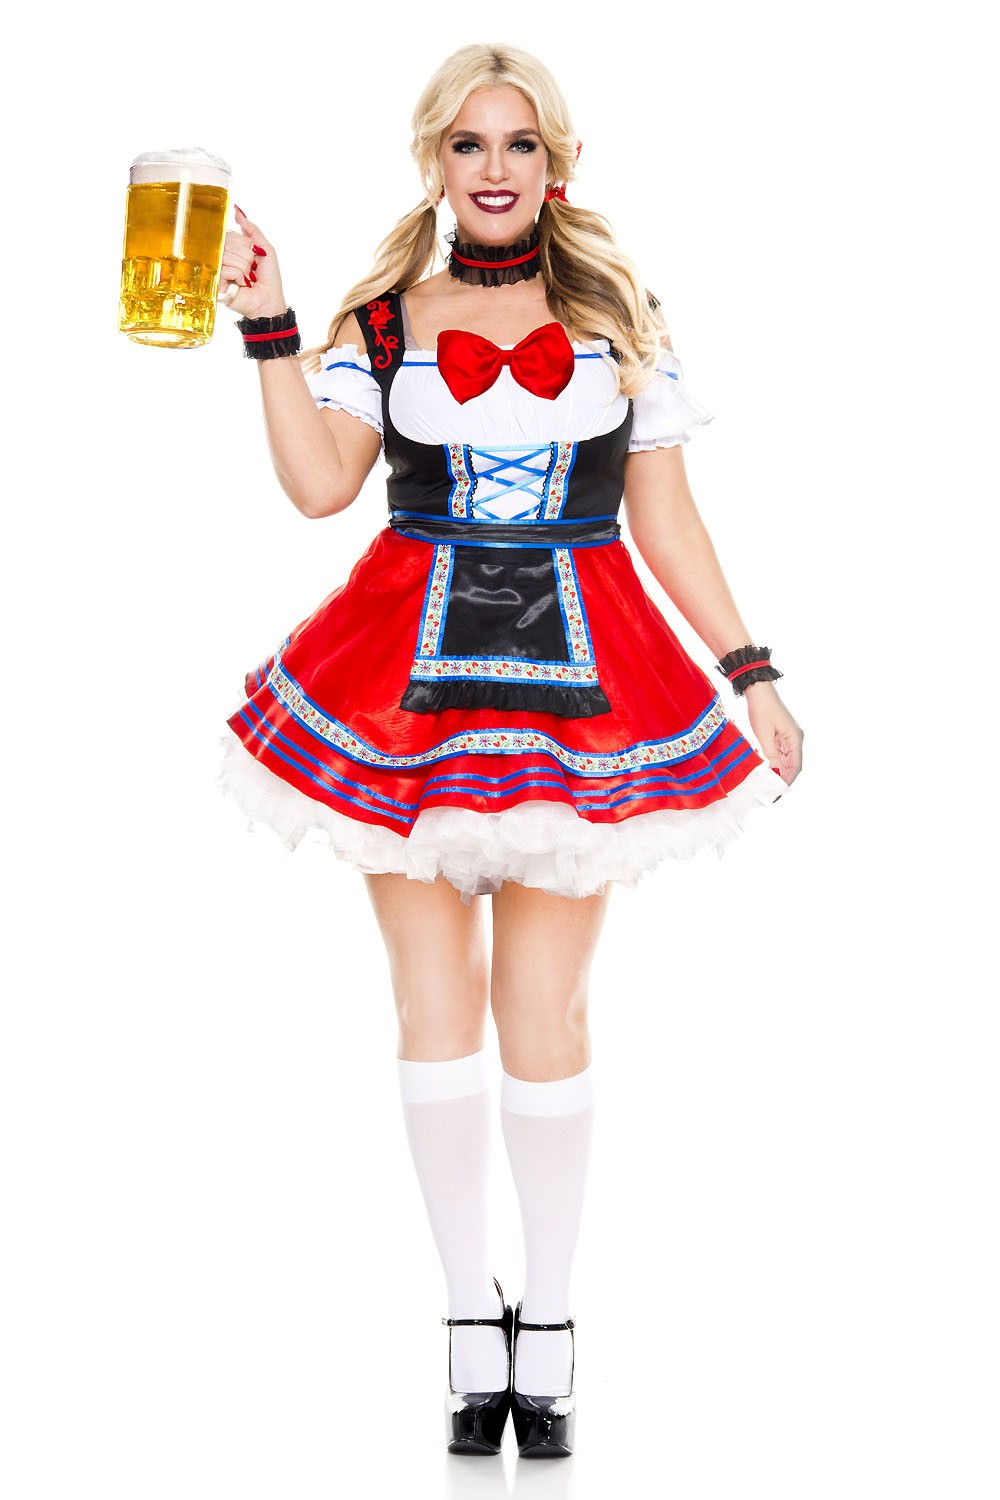 Adult Plus Size Oktoberfest Beer Babe Woman Costume 34 99 The Costume Land